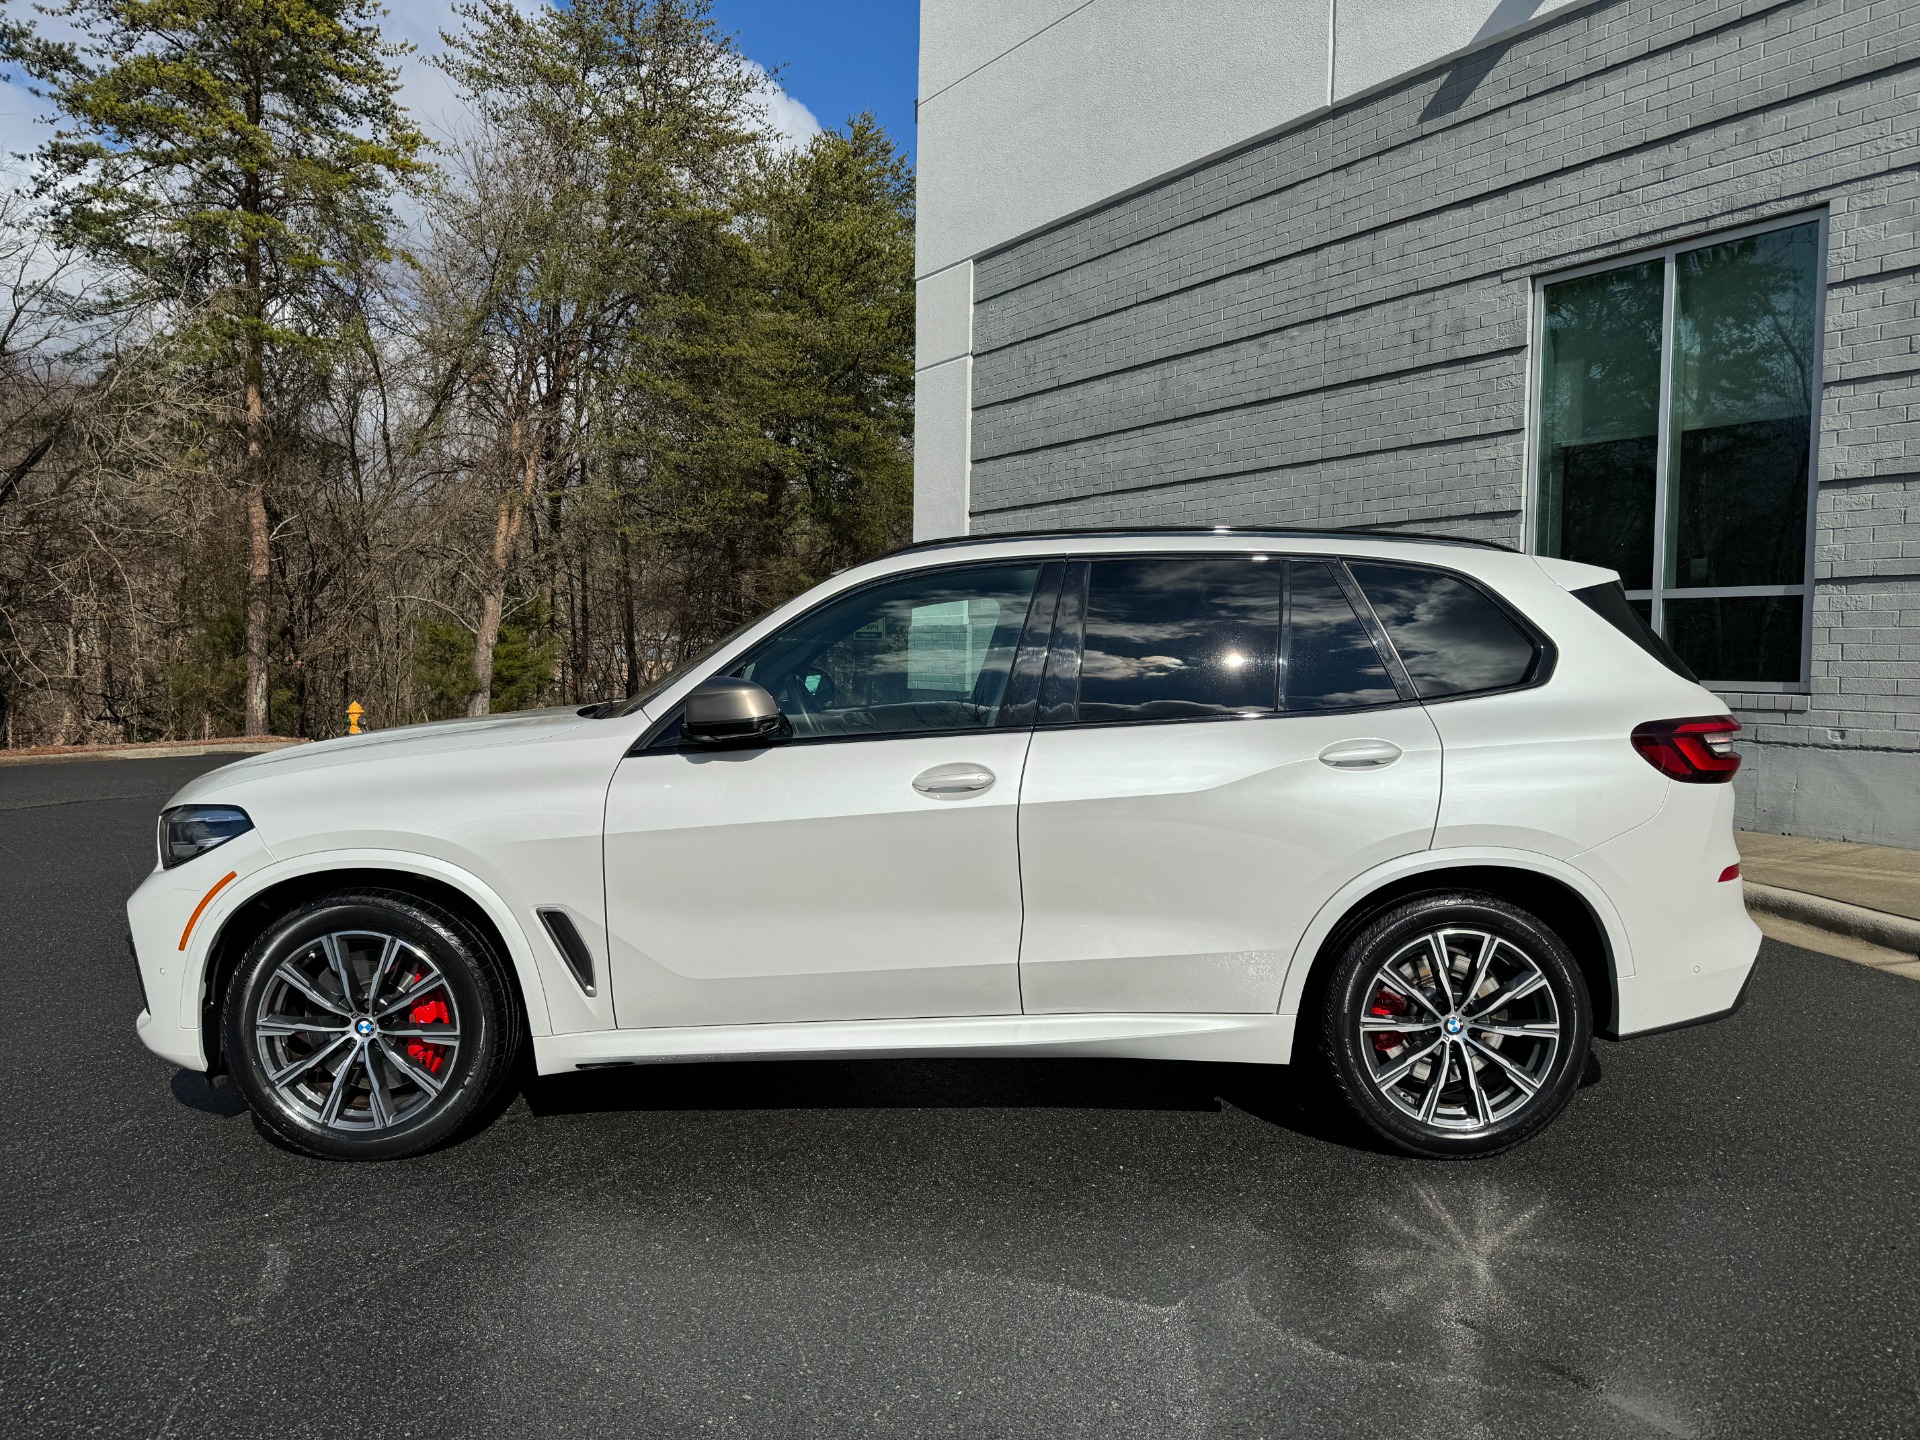 Used 2021 BMW X5 M50i AIR SUSPENSION / COGNAC LEATHER for sale $55,000 at Formula Imports in Charlotte NC 28227 3